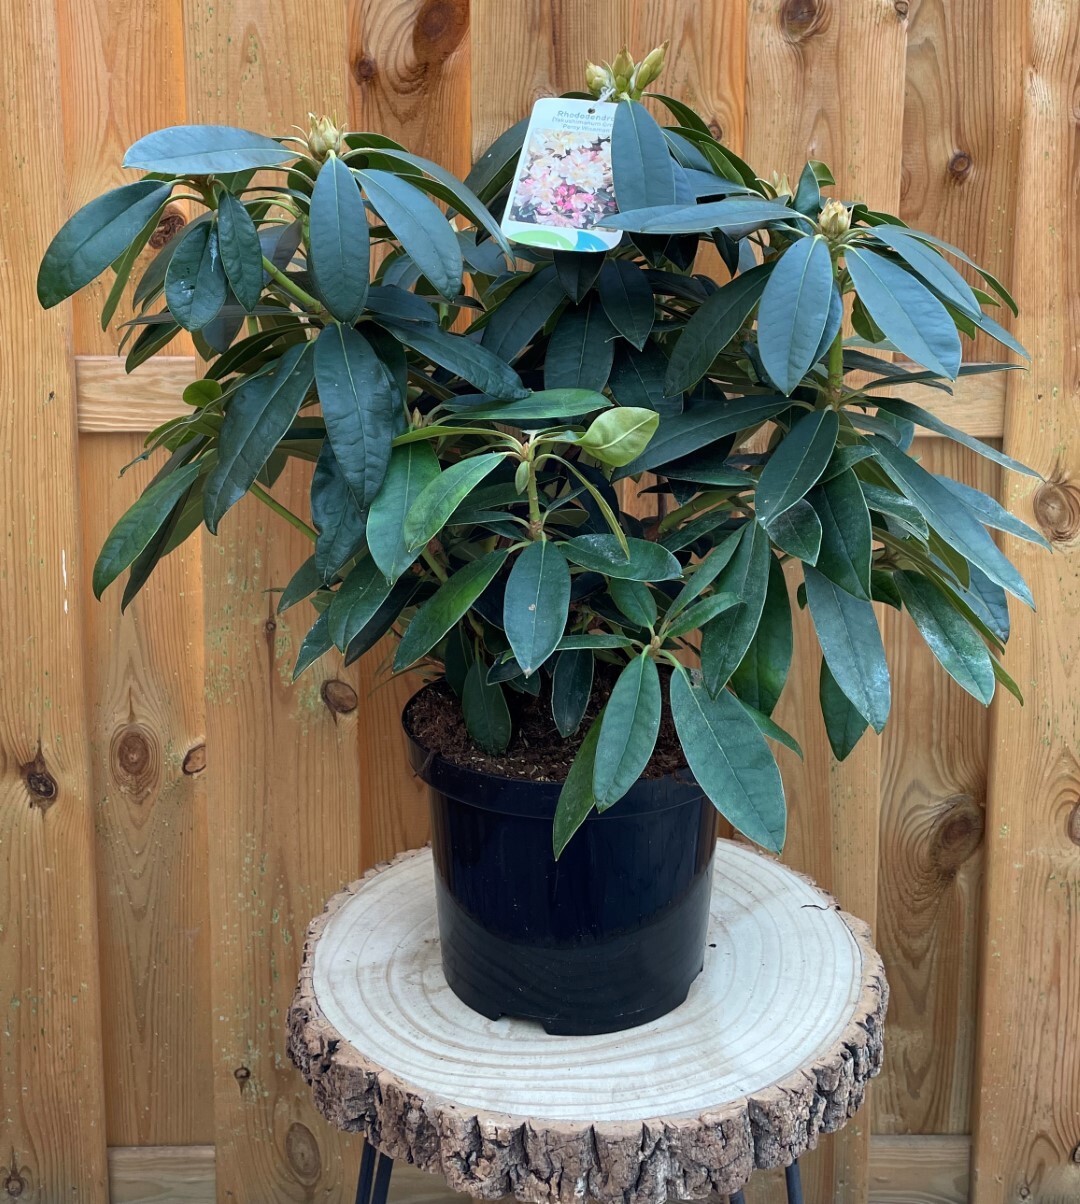 https://www.warentuin.nl/media/catalog/product/R/h/Rhododendron_Percy_Wiseman_c4e5.jpg